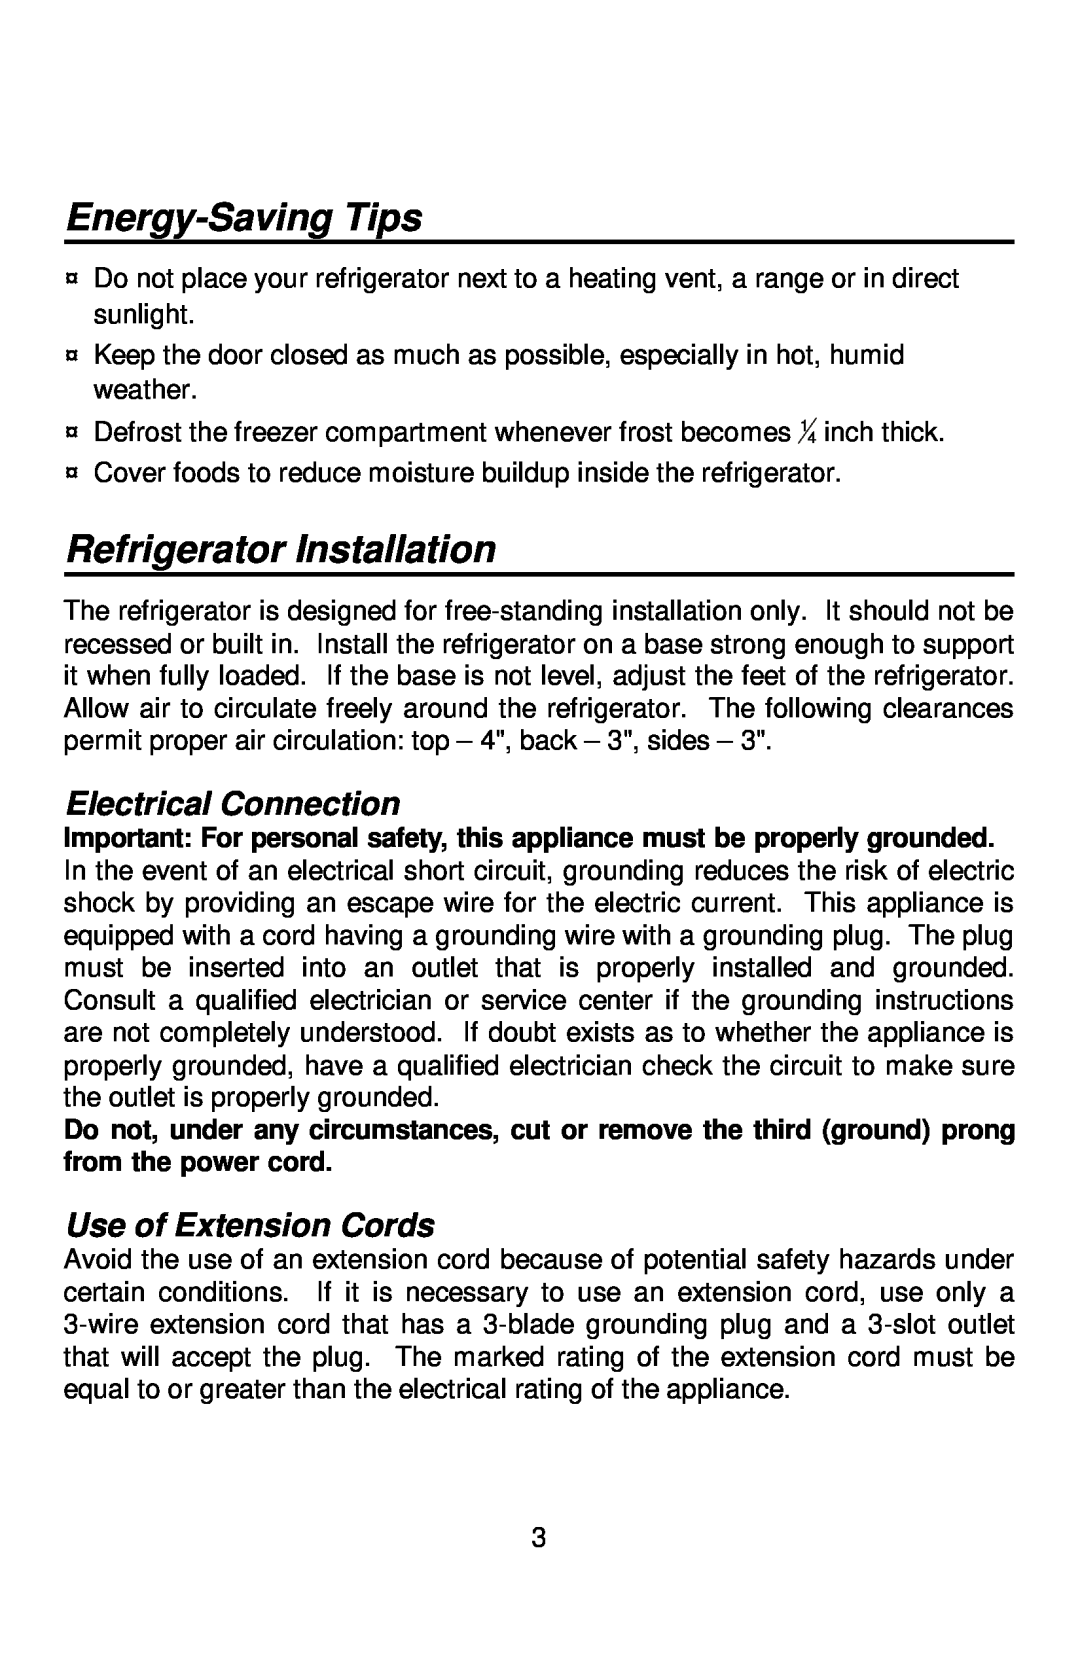 Franklin Industries, L.L.C FC-380 Series manual Energy-SavingTips, Refrigerator Installation, Electrical Connection 